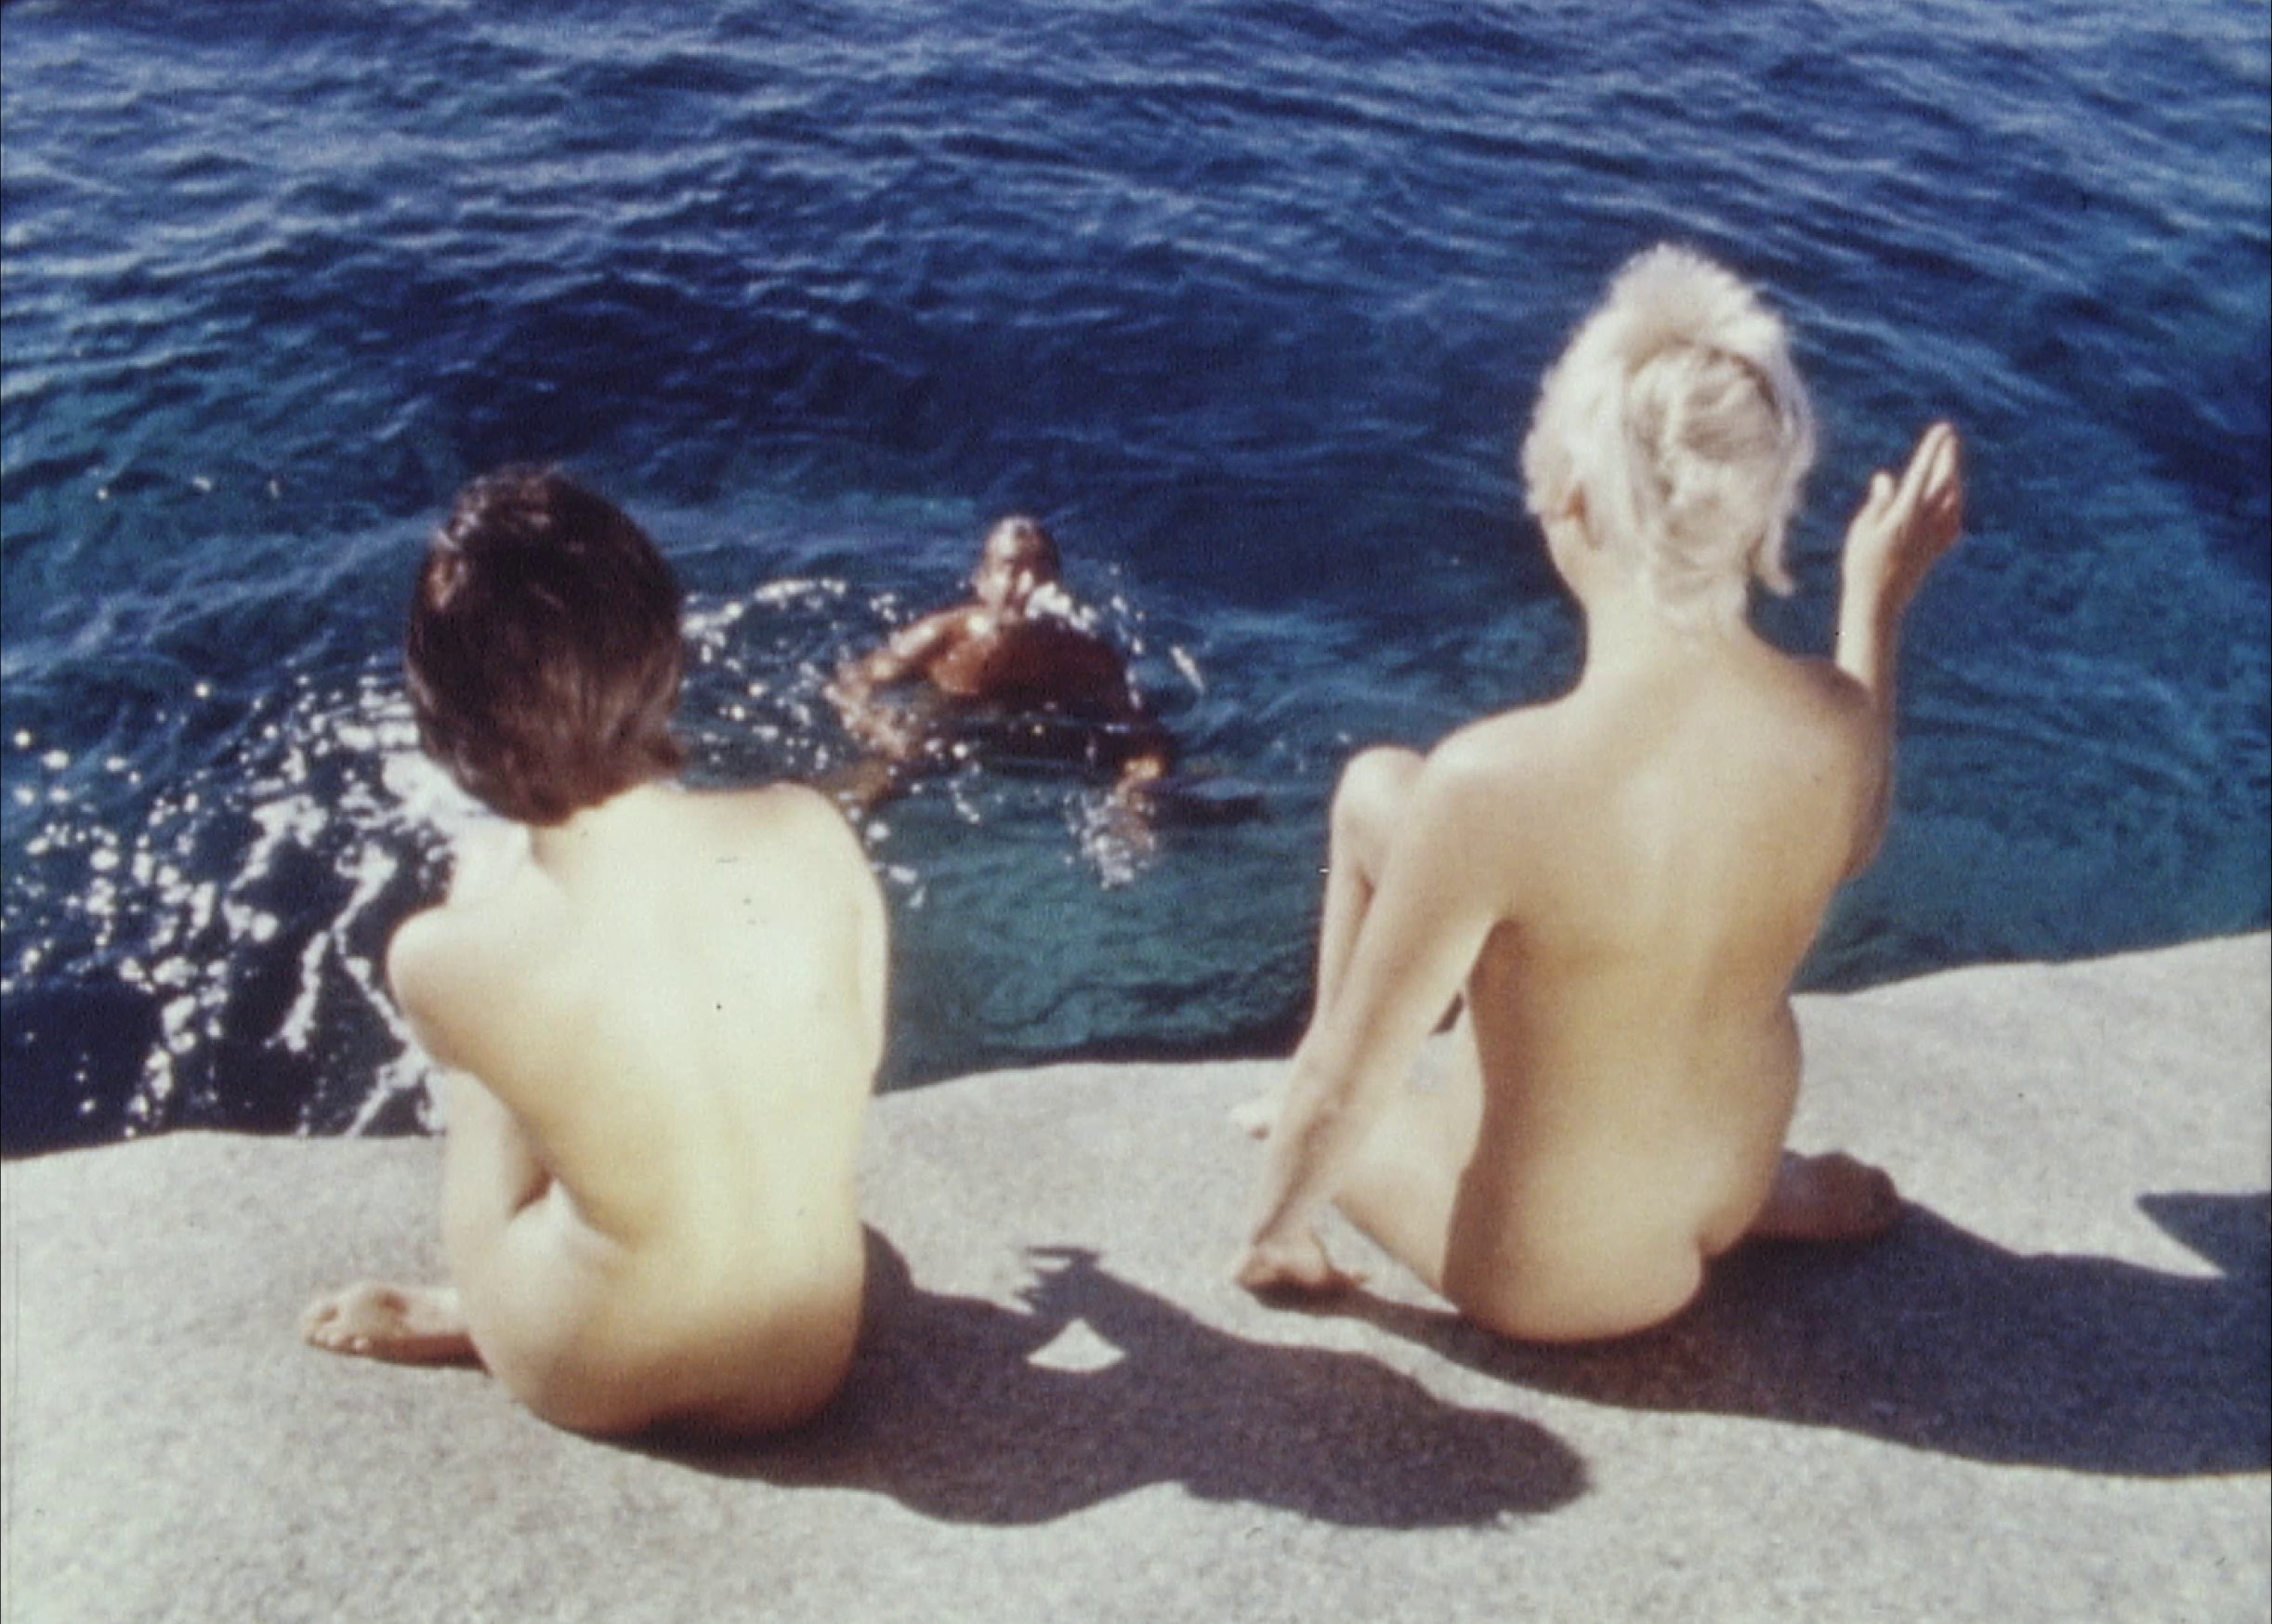 Sun-drenched nudist films from the 50s and pic